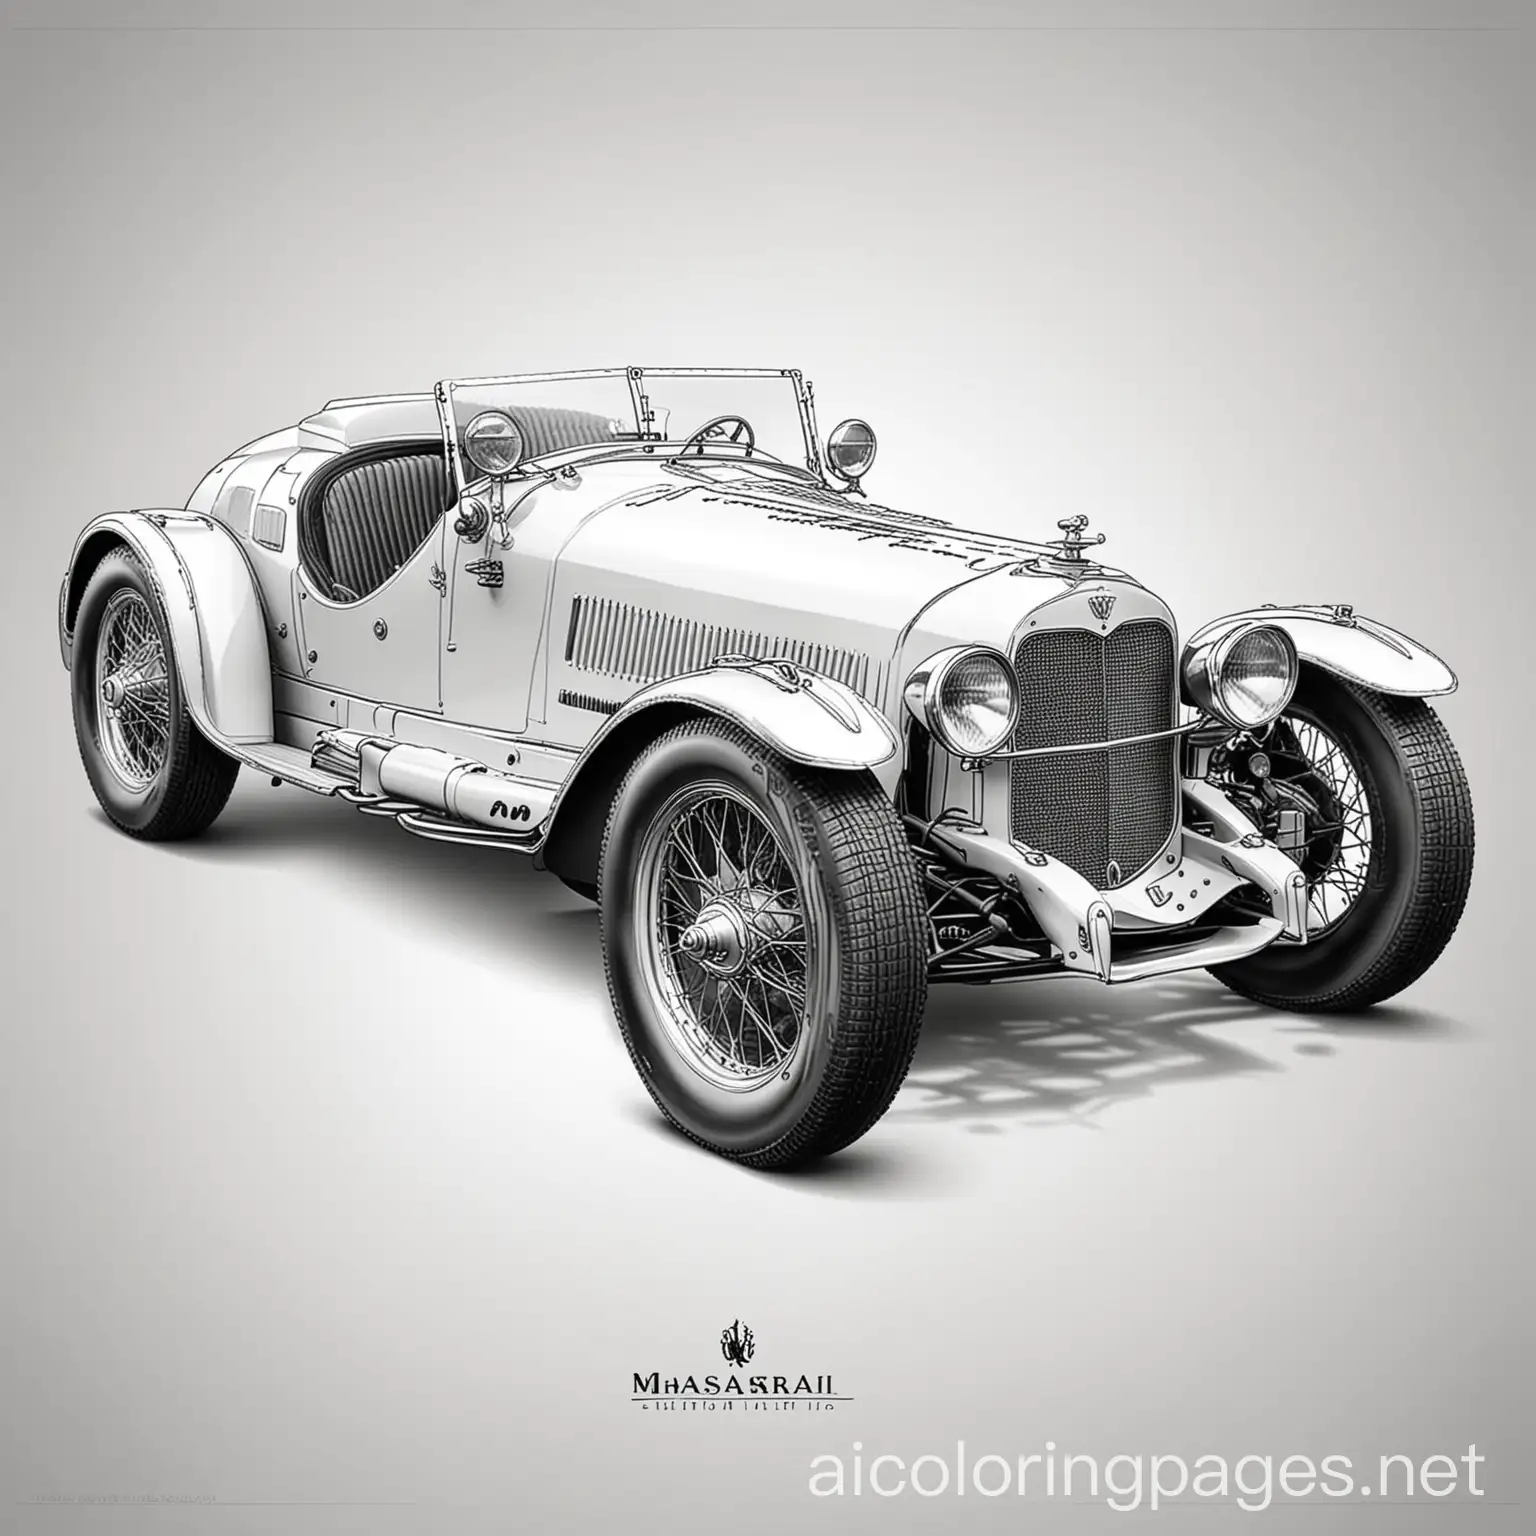 Maserati Tipo 26 from 1926 coloring page, Coloring Page, black and white, line art, white background, Simplicity, Ample White Space. The background of the coloring page is plain white to make it easy for young children to color within the lines. The outlines of all the subjects are easy to distinguish, making it simple for kids to color without too much difficulty